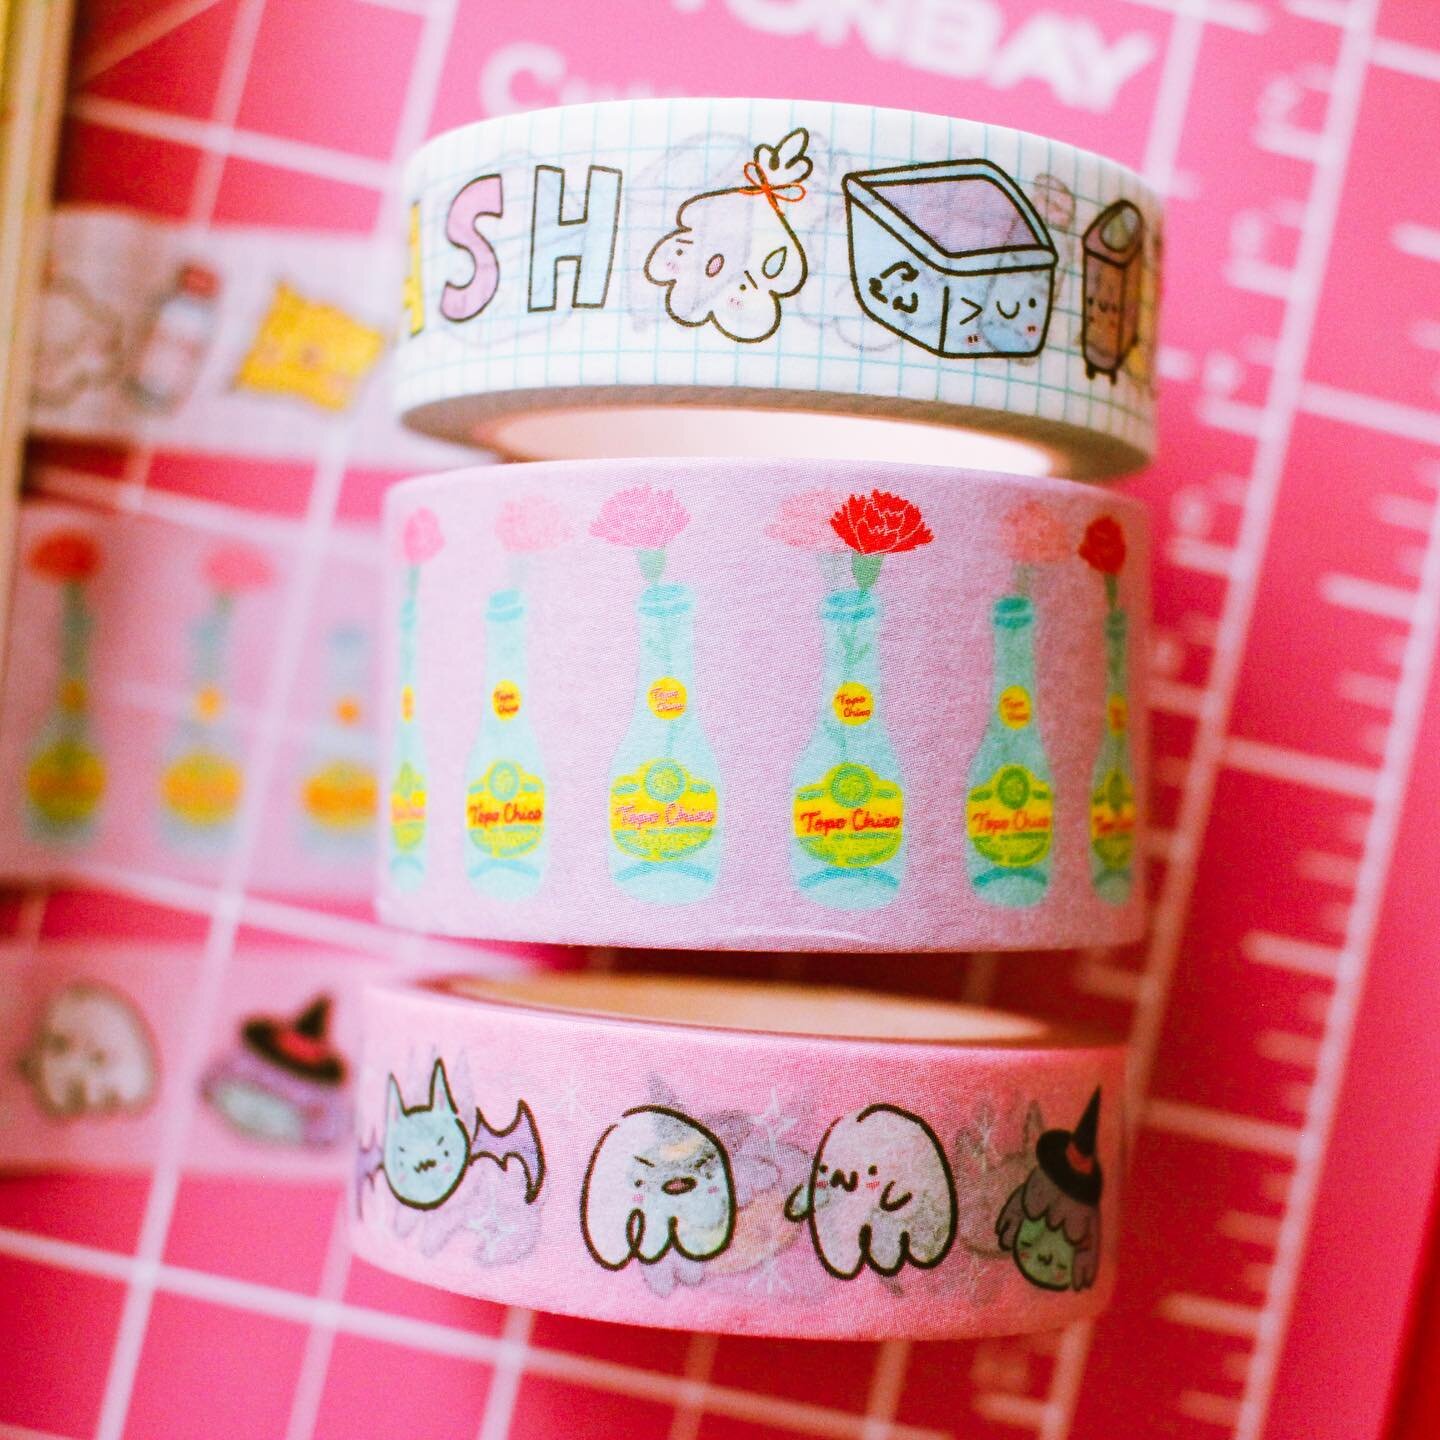 ✨ The day approaches! ✨
.
These washi tape rolls and many other goodies will be hitting the shop this Friday the 23rd at 12 Noon CDT!
.
The nice bonus of growing my washi tape collection is being able to further mix and match when I use them to pack 